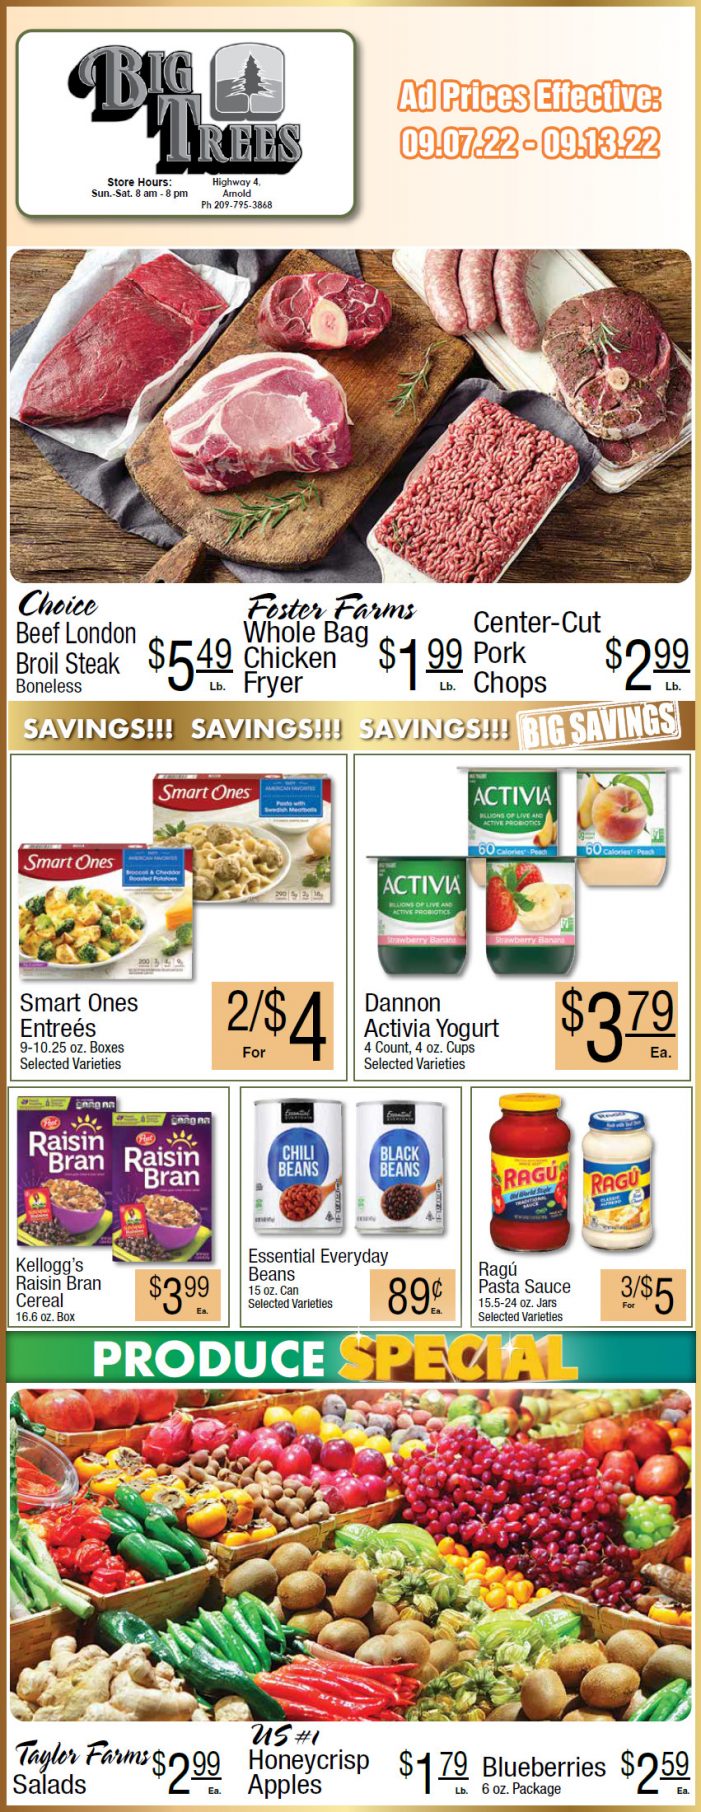 Big Trees Market Weekly Ad & Grocery Specials Through Sept 13th  Shop Local & Save!!